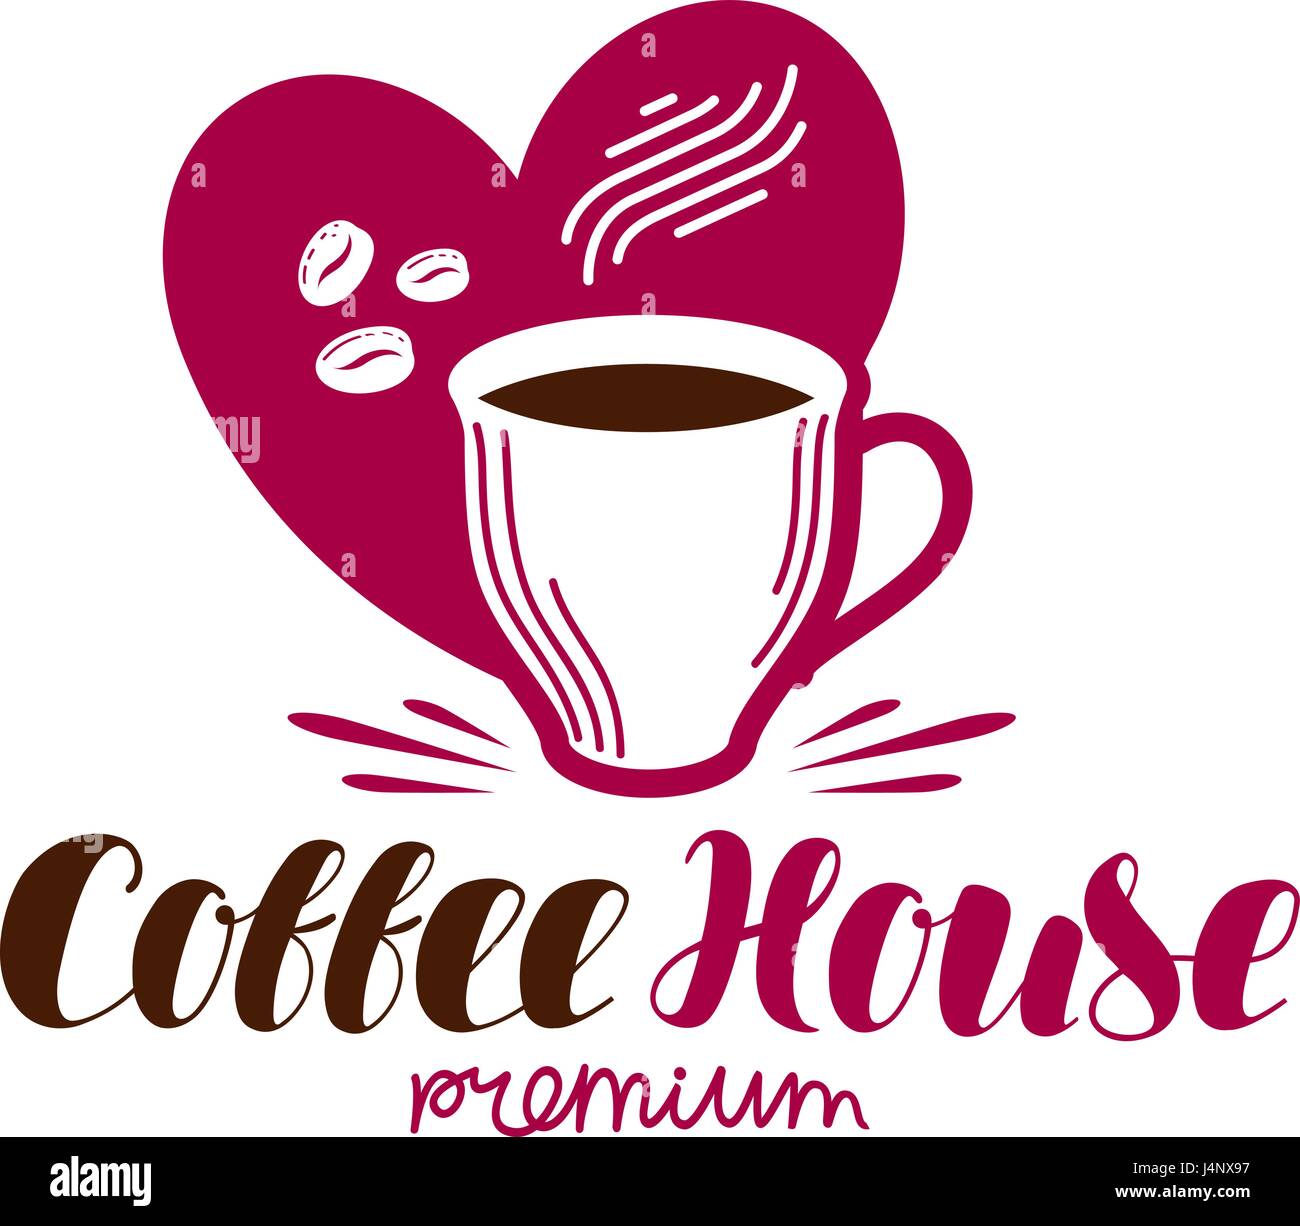 Coffee house, cafe logo. Espresso, cappuccino, hot drink label or icon. Lettering vector illustration Stock Vector